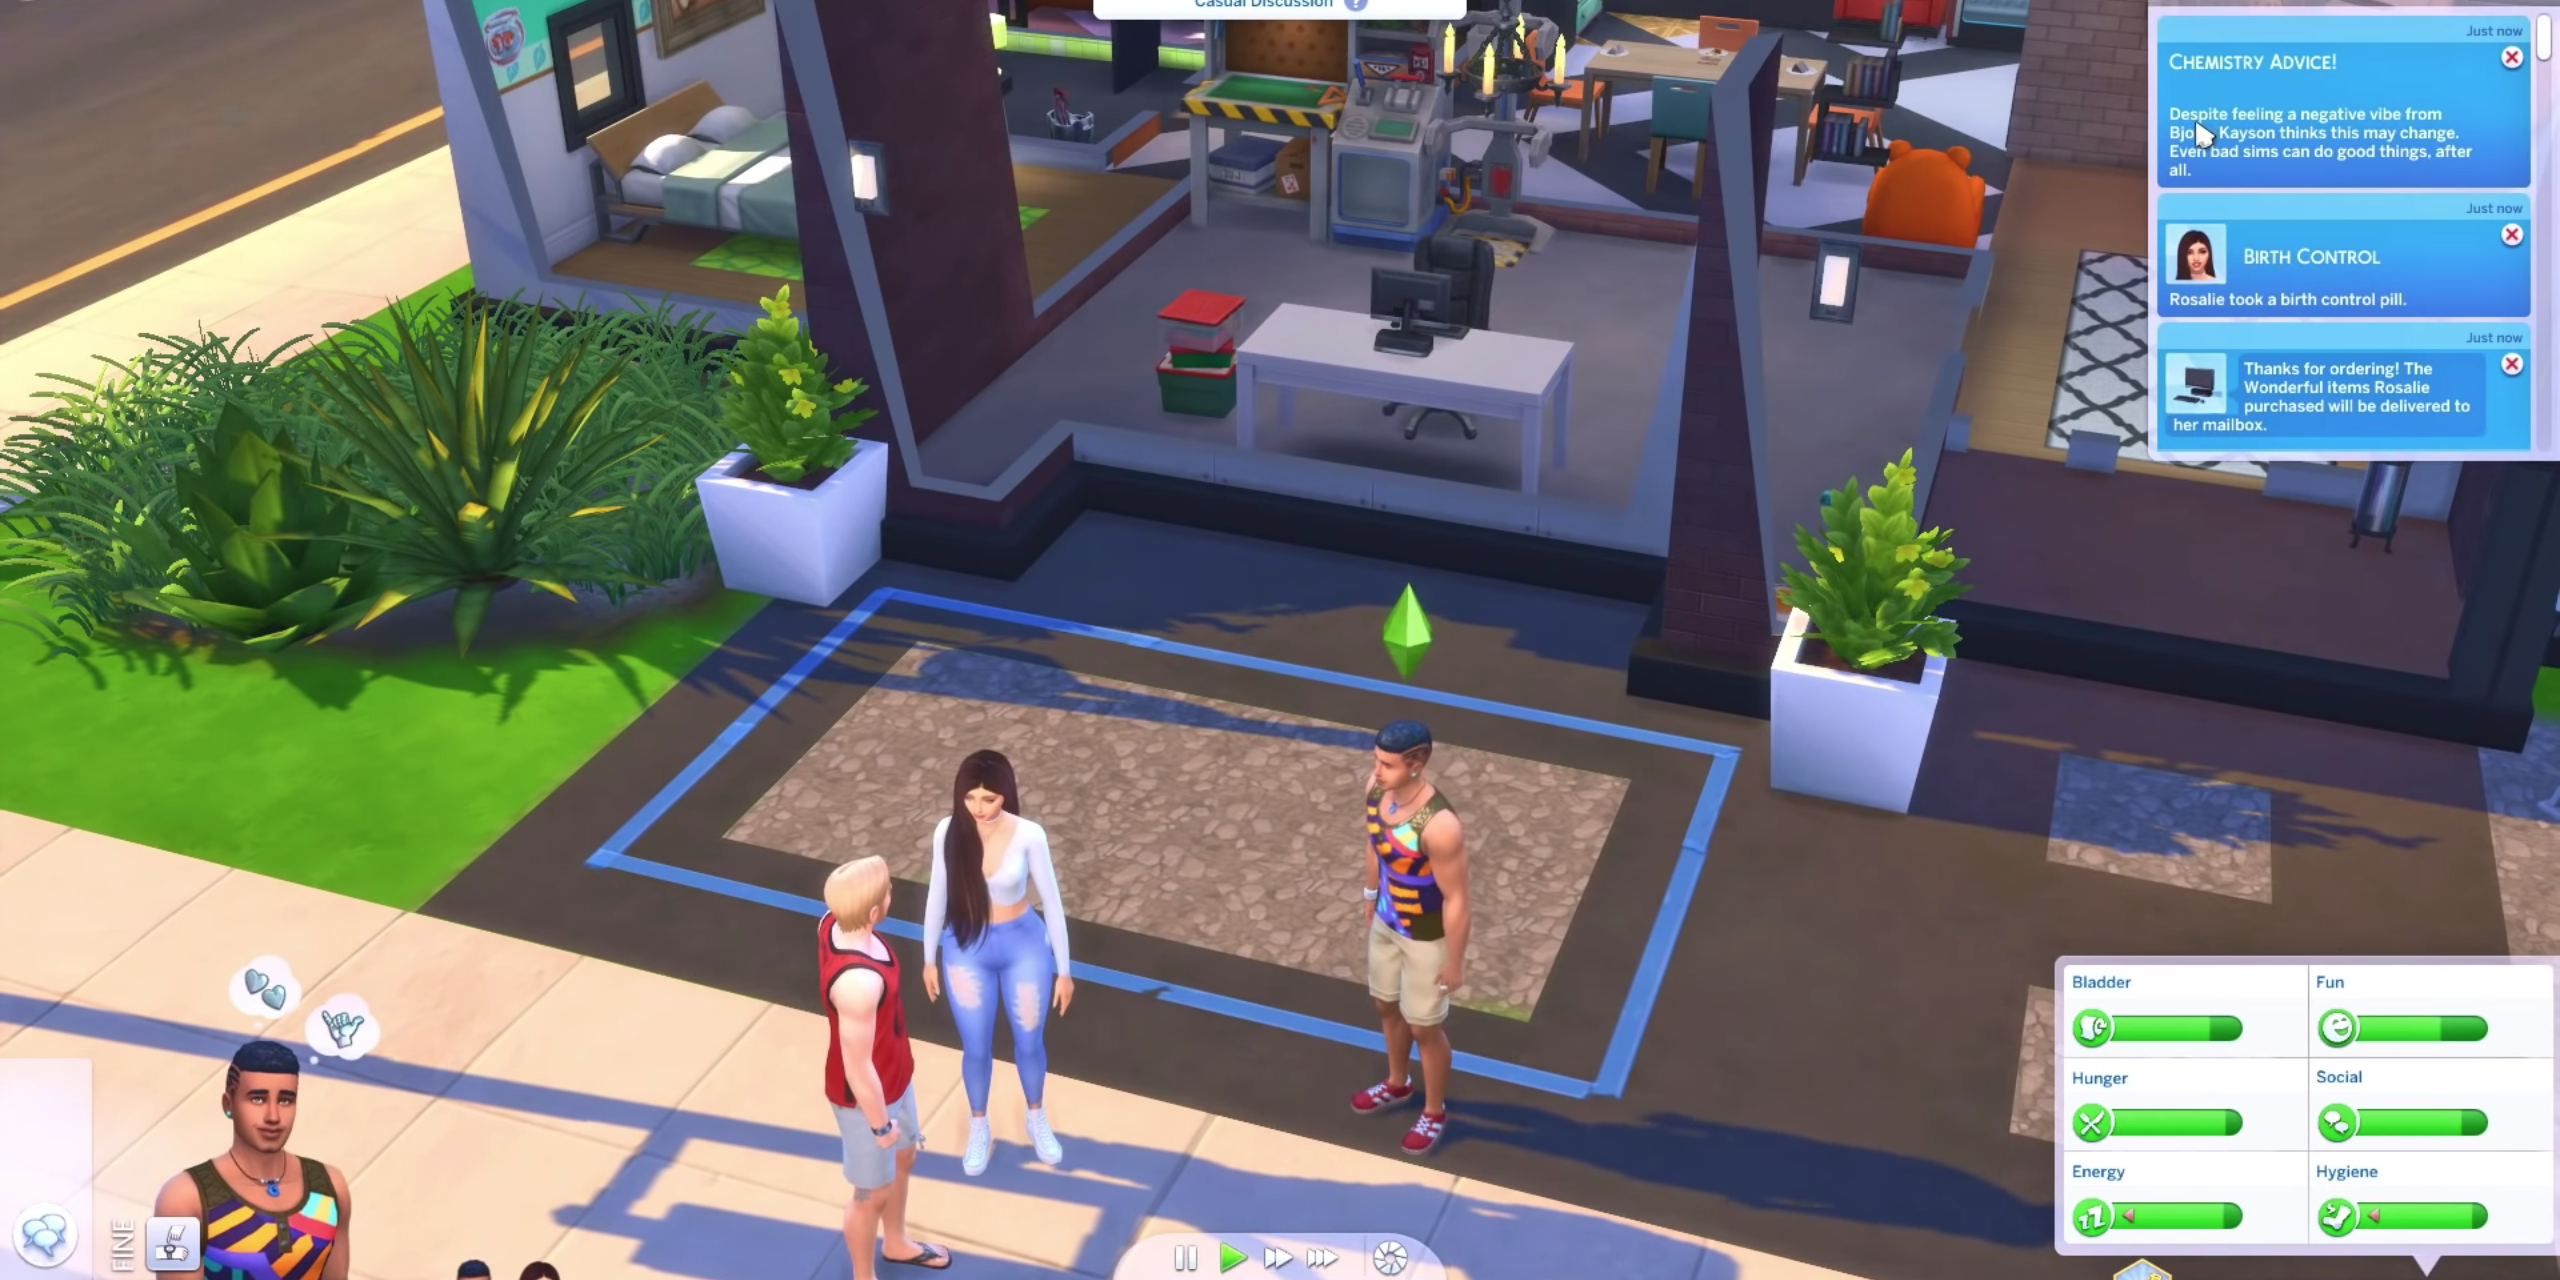 The Sims 4 Wonderful Whims mod with in-game notifications about chemistry and birth control